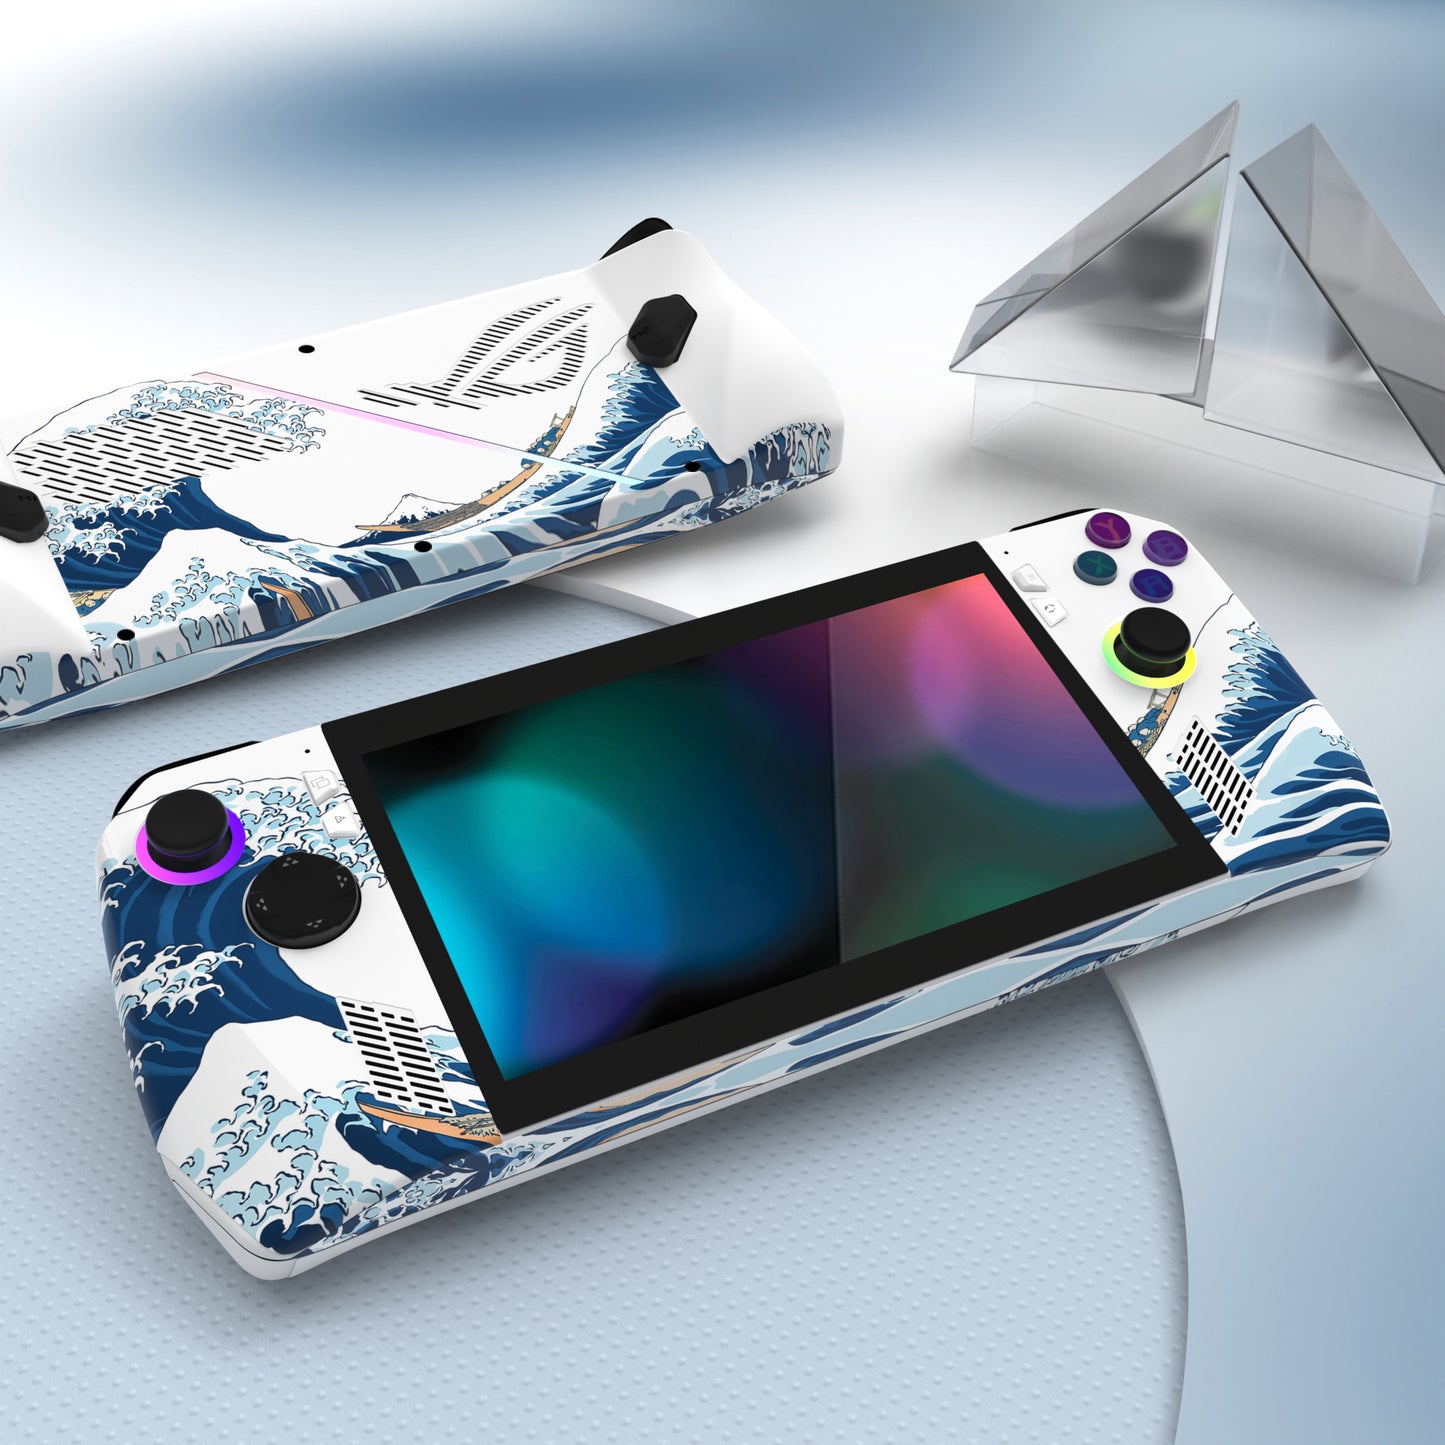 PlayVital The Great Wave off Kanagawa Custom Stickers Vinyl Wraps Protective Skin Decal for ROG Ally Handheld Gaming Console - RGTM016 PlayVital